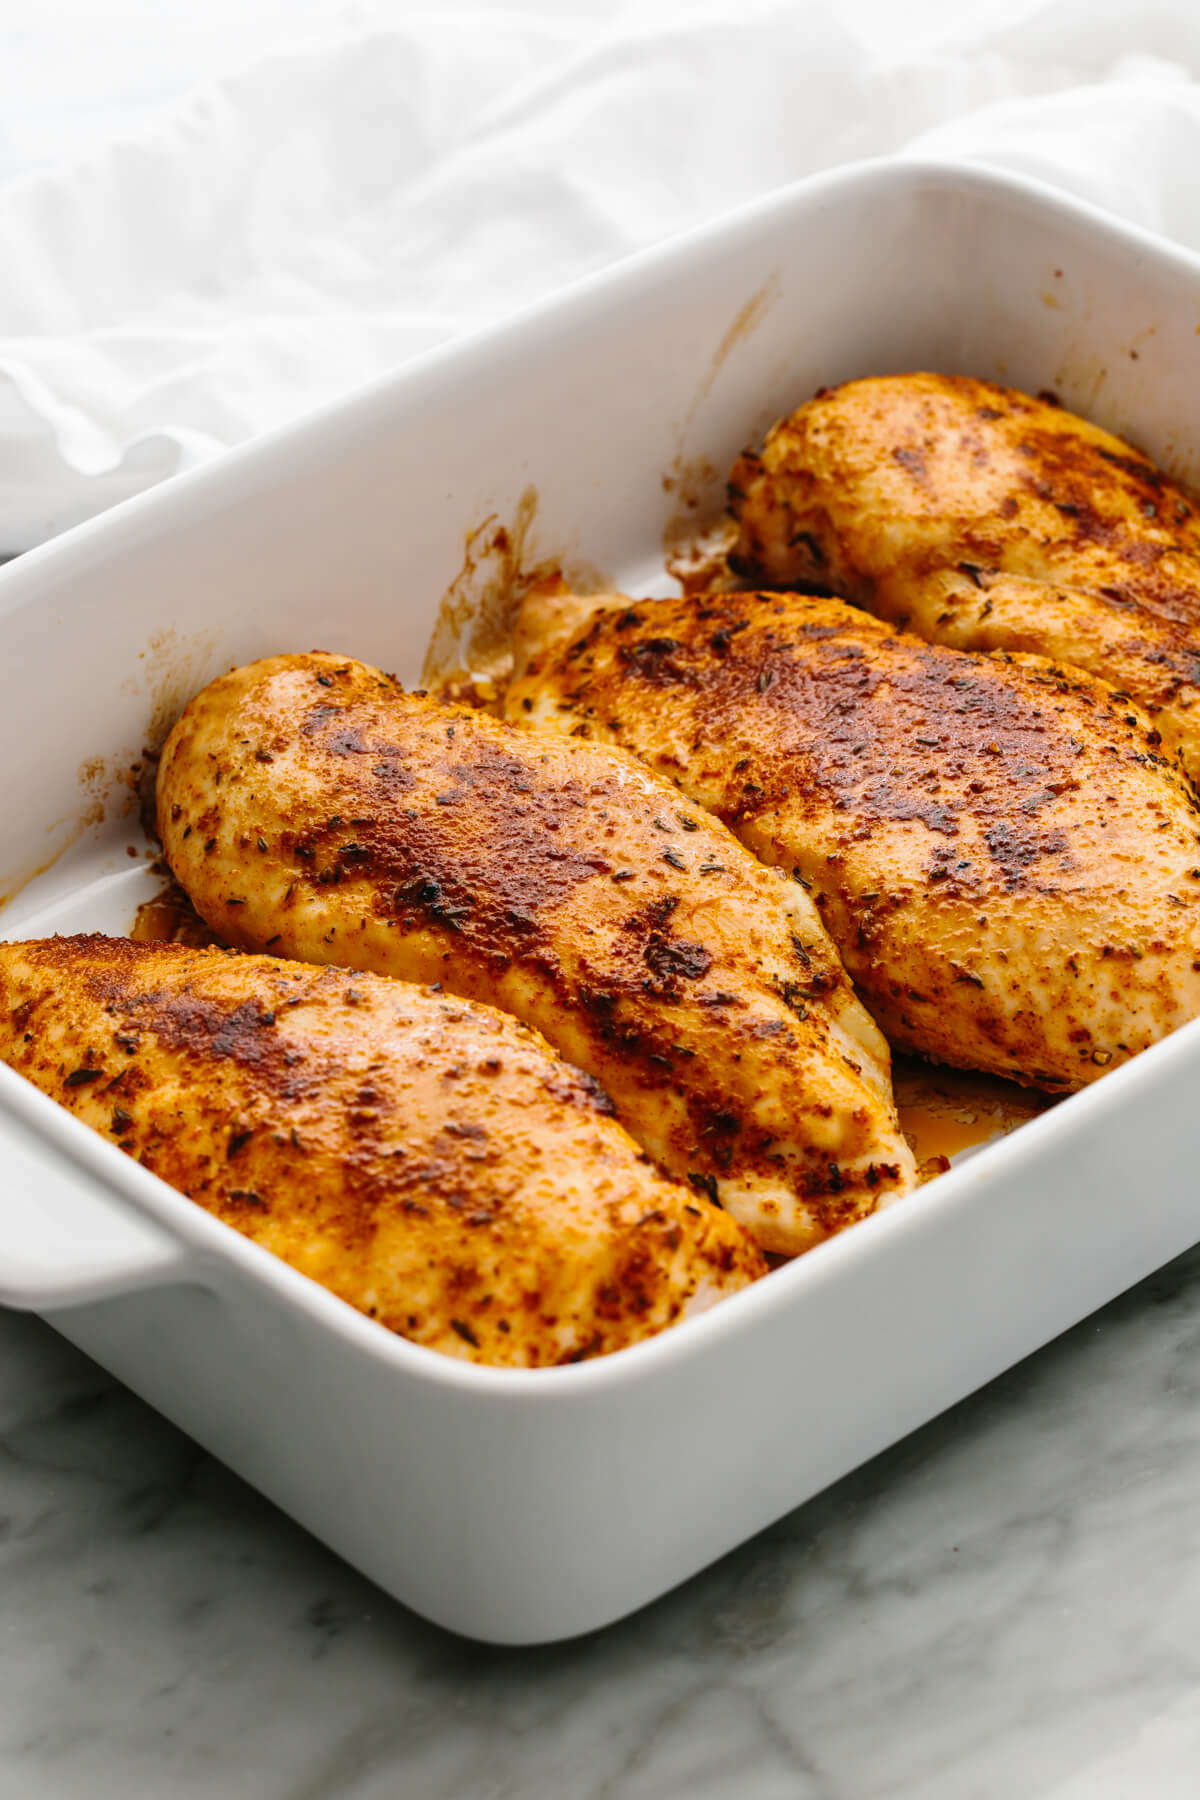 Four chicken breasts in a baking dish.